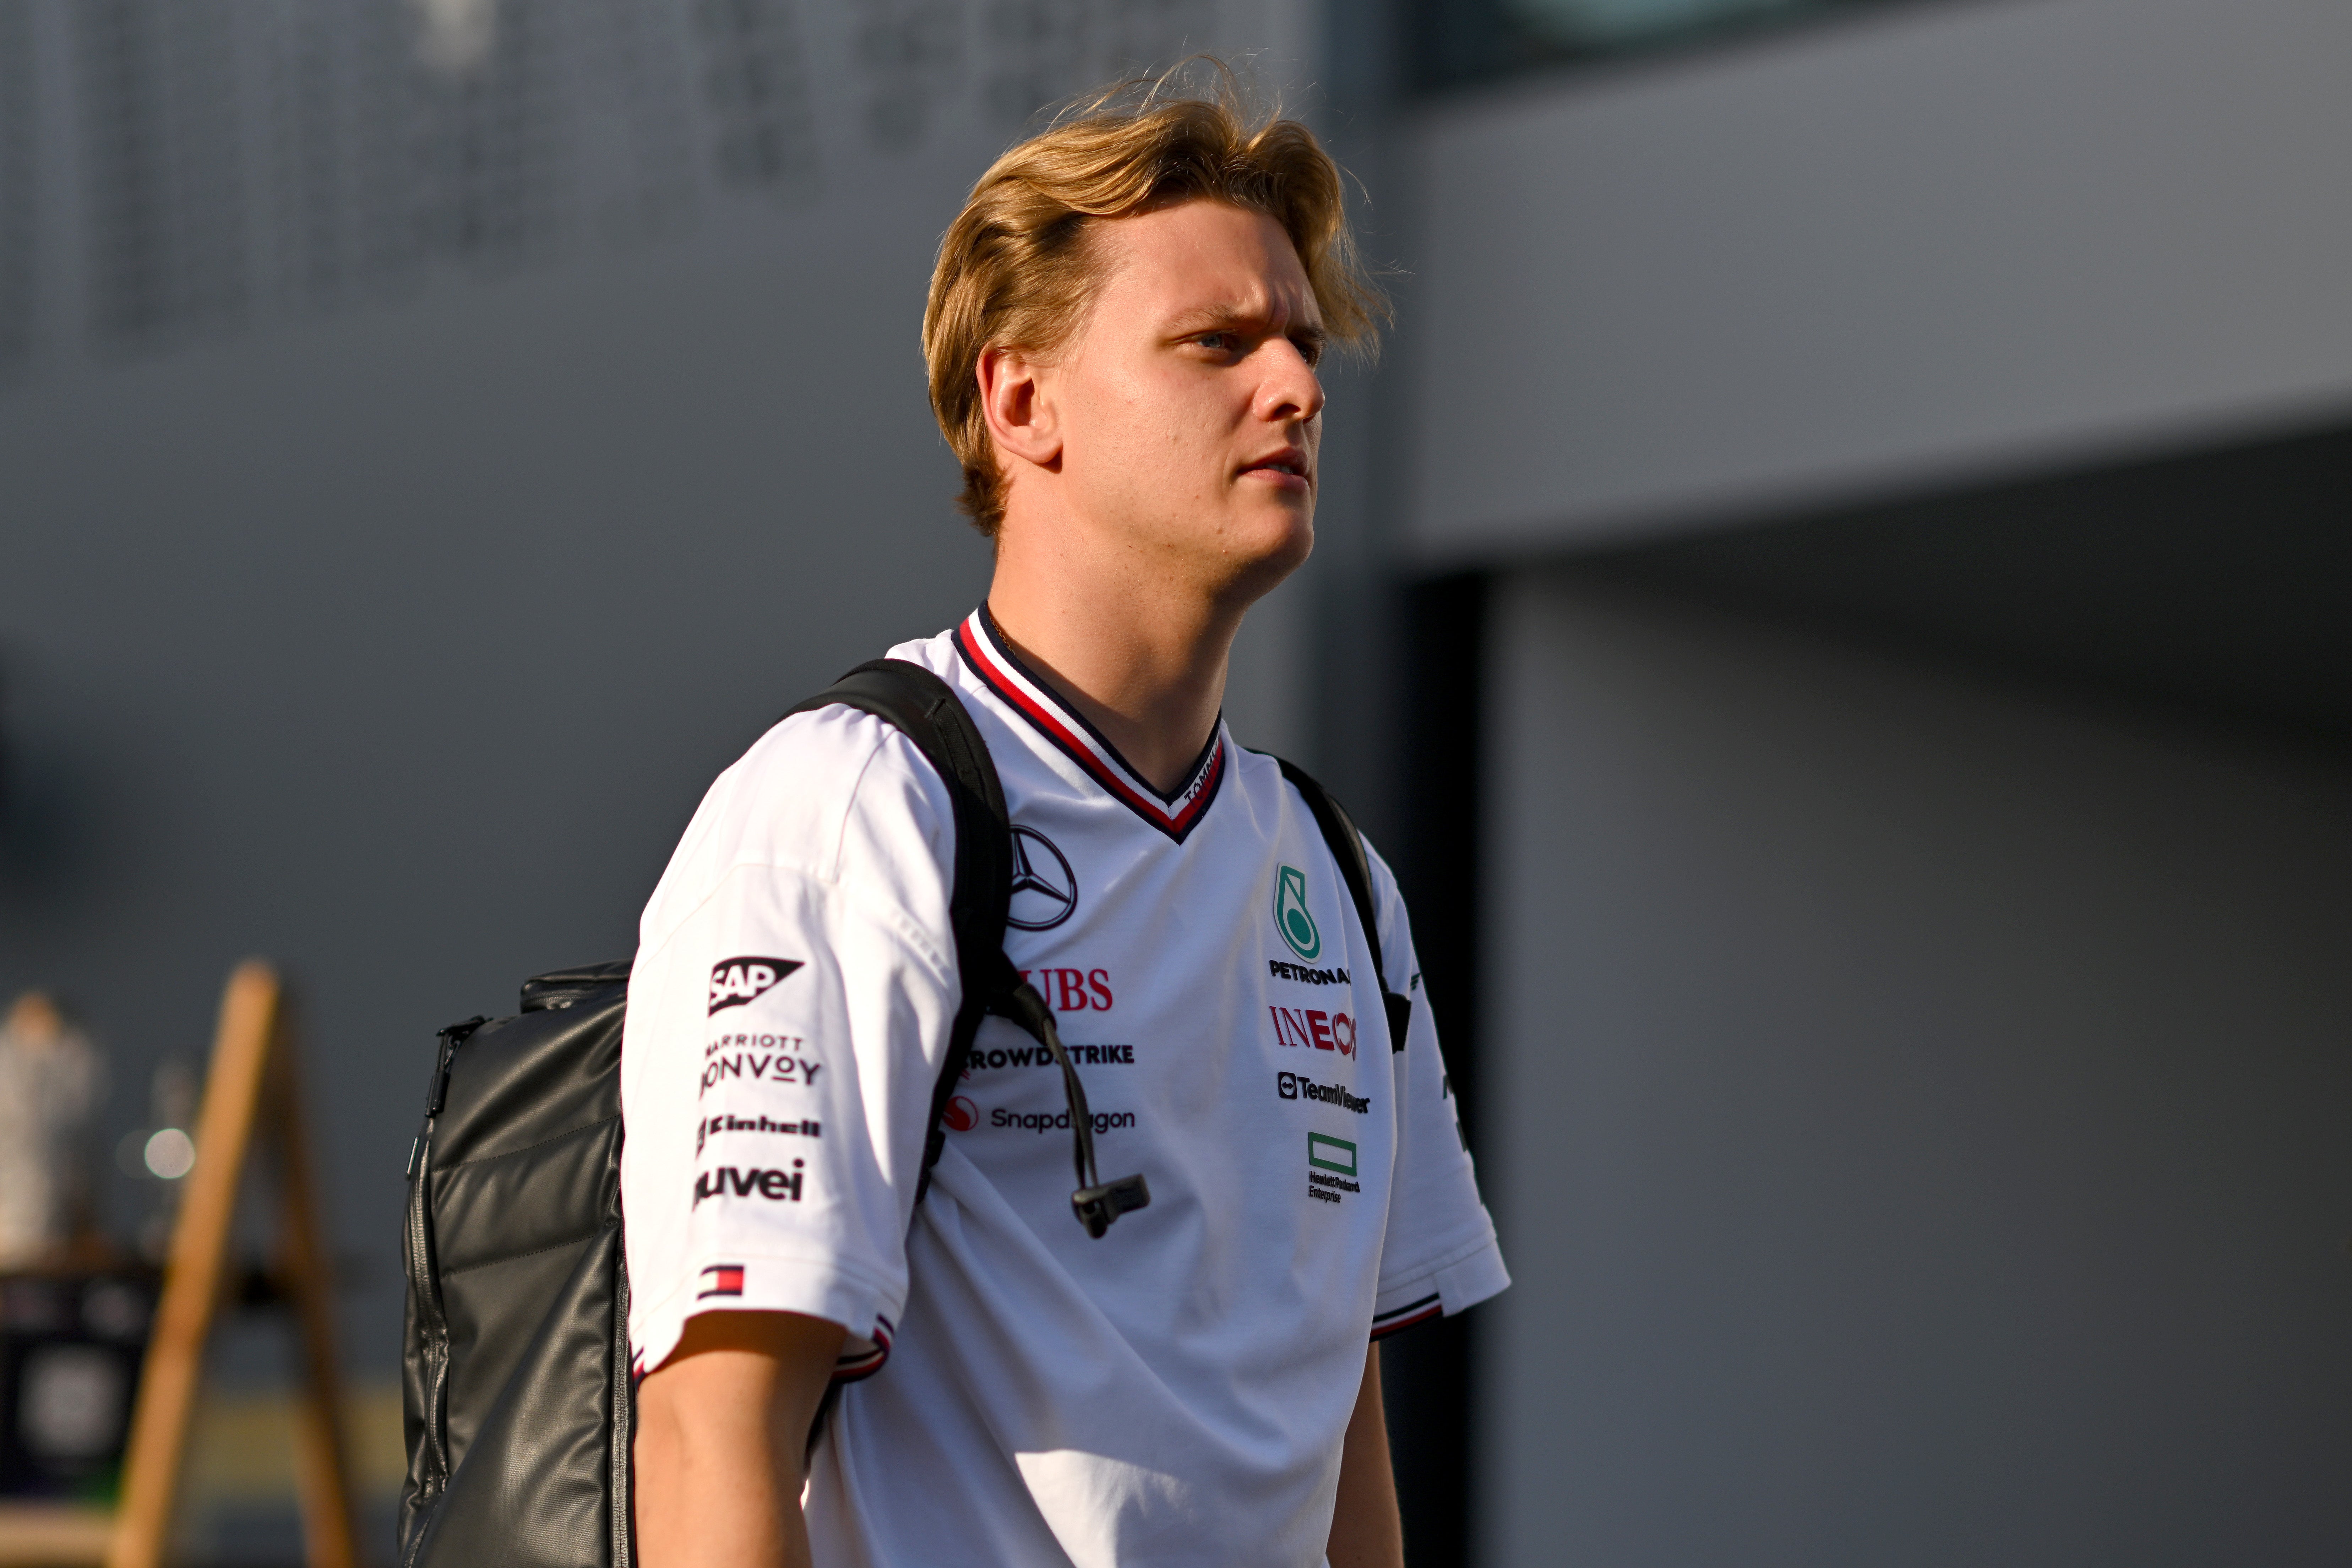 Mick Schumacher is eyeing a spot back on the grid after being dropped by Haas in 2022